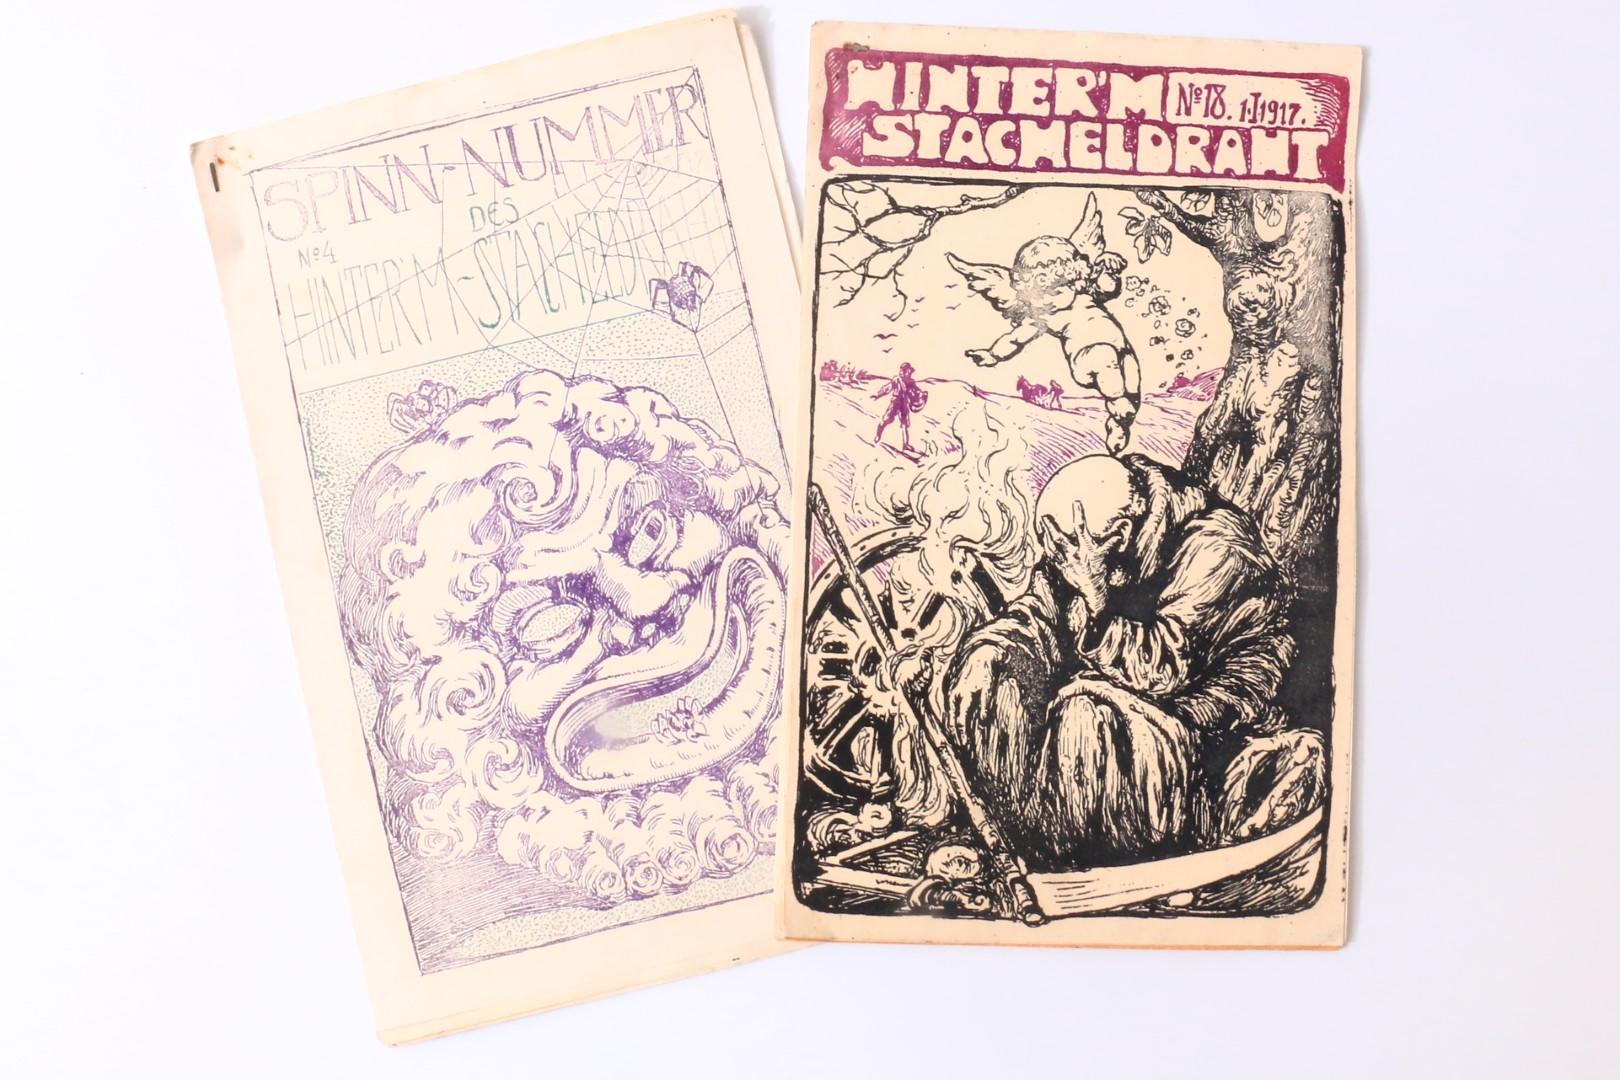 Various - Two German Self-Published Pieces - Hinter'M Stacheldraht - No Publisher, 1917, First Edition.